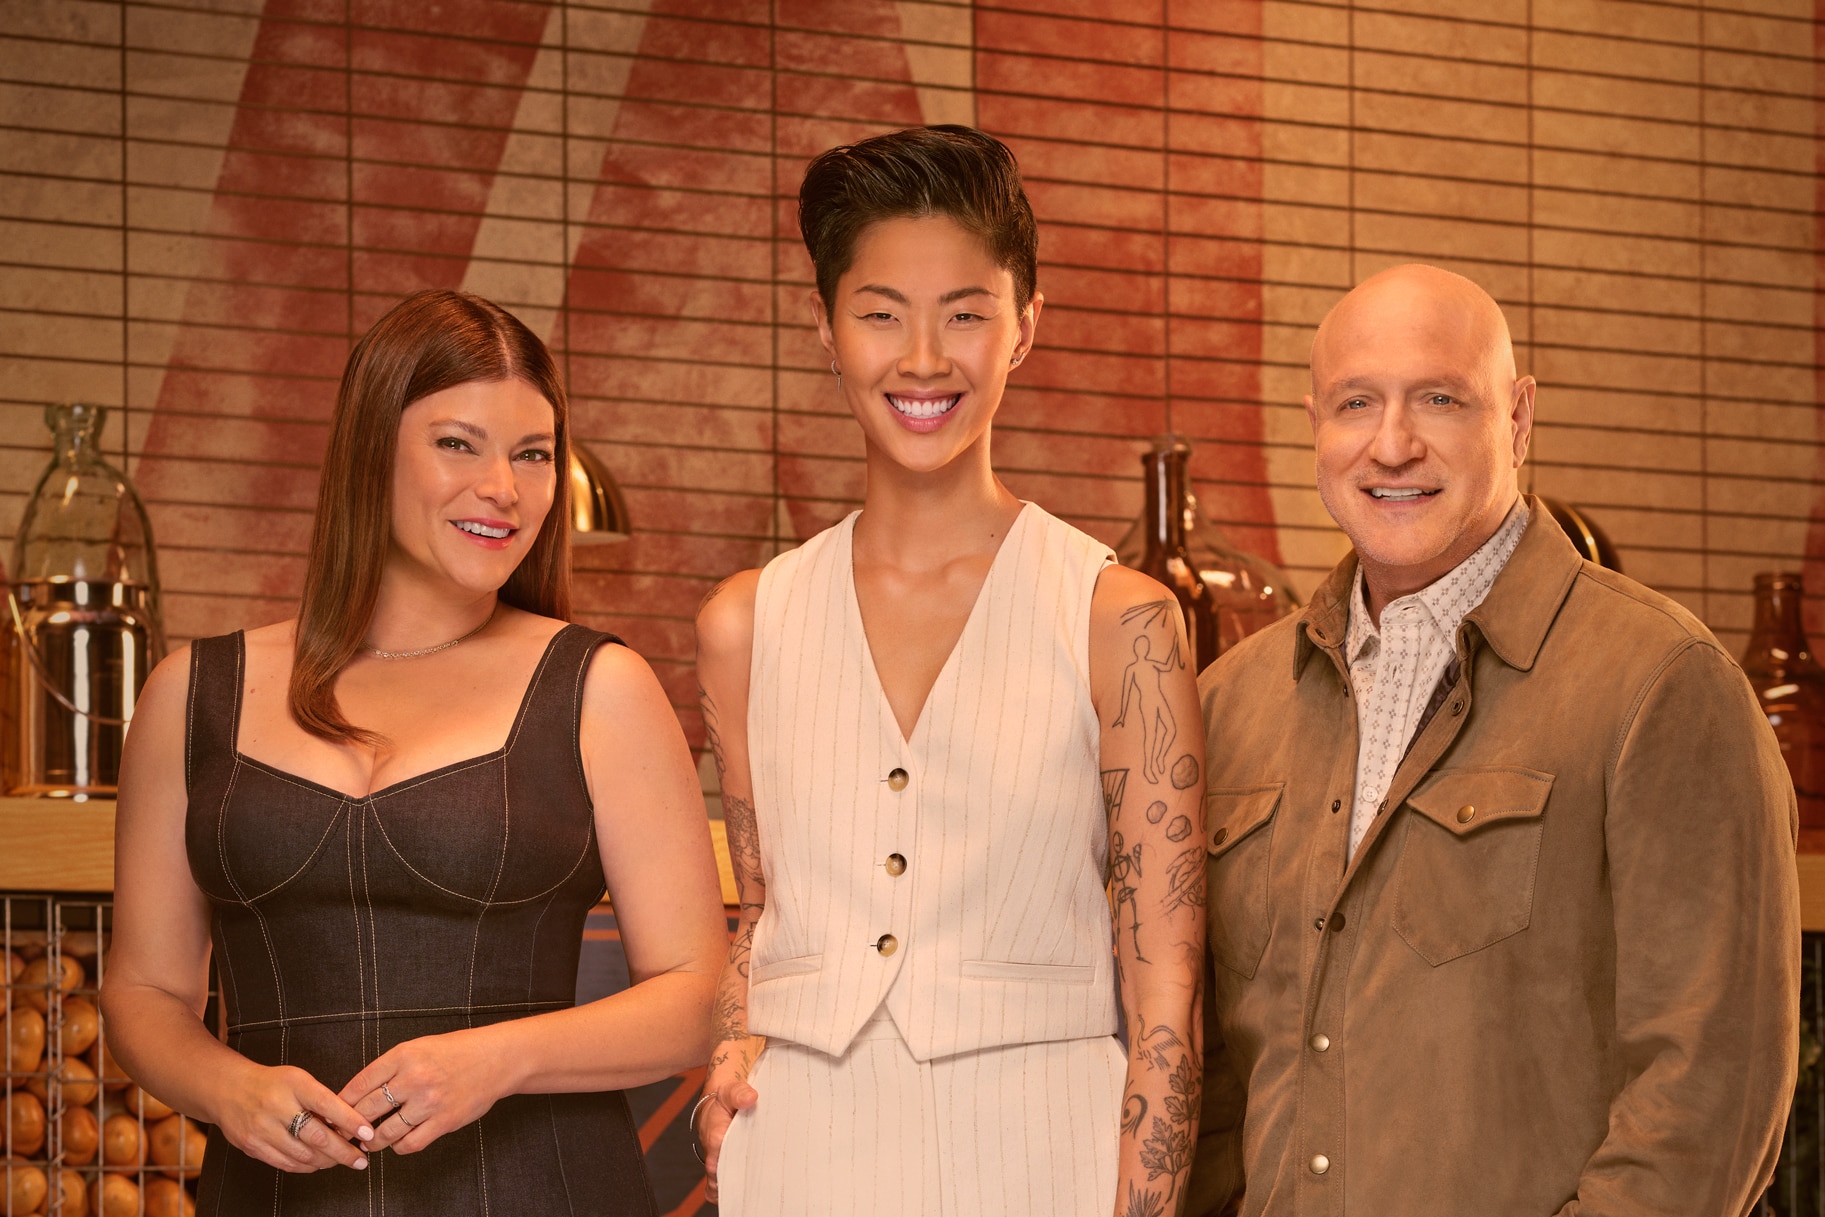 Gail Simmons, Kristen Kish, and Tom Colicchio in a kitchen pantry together